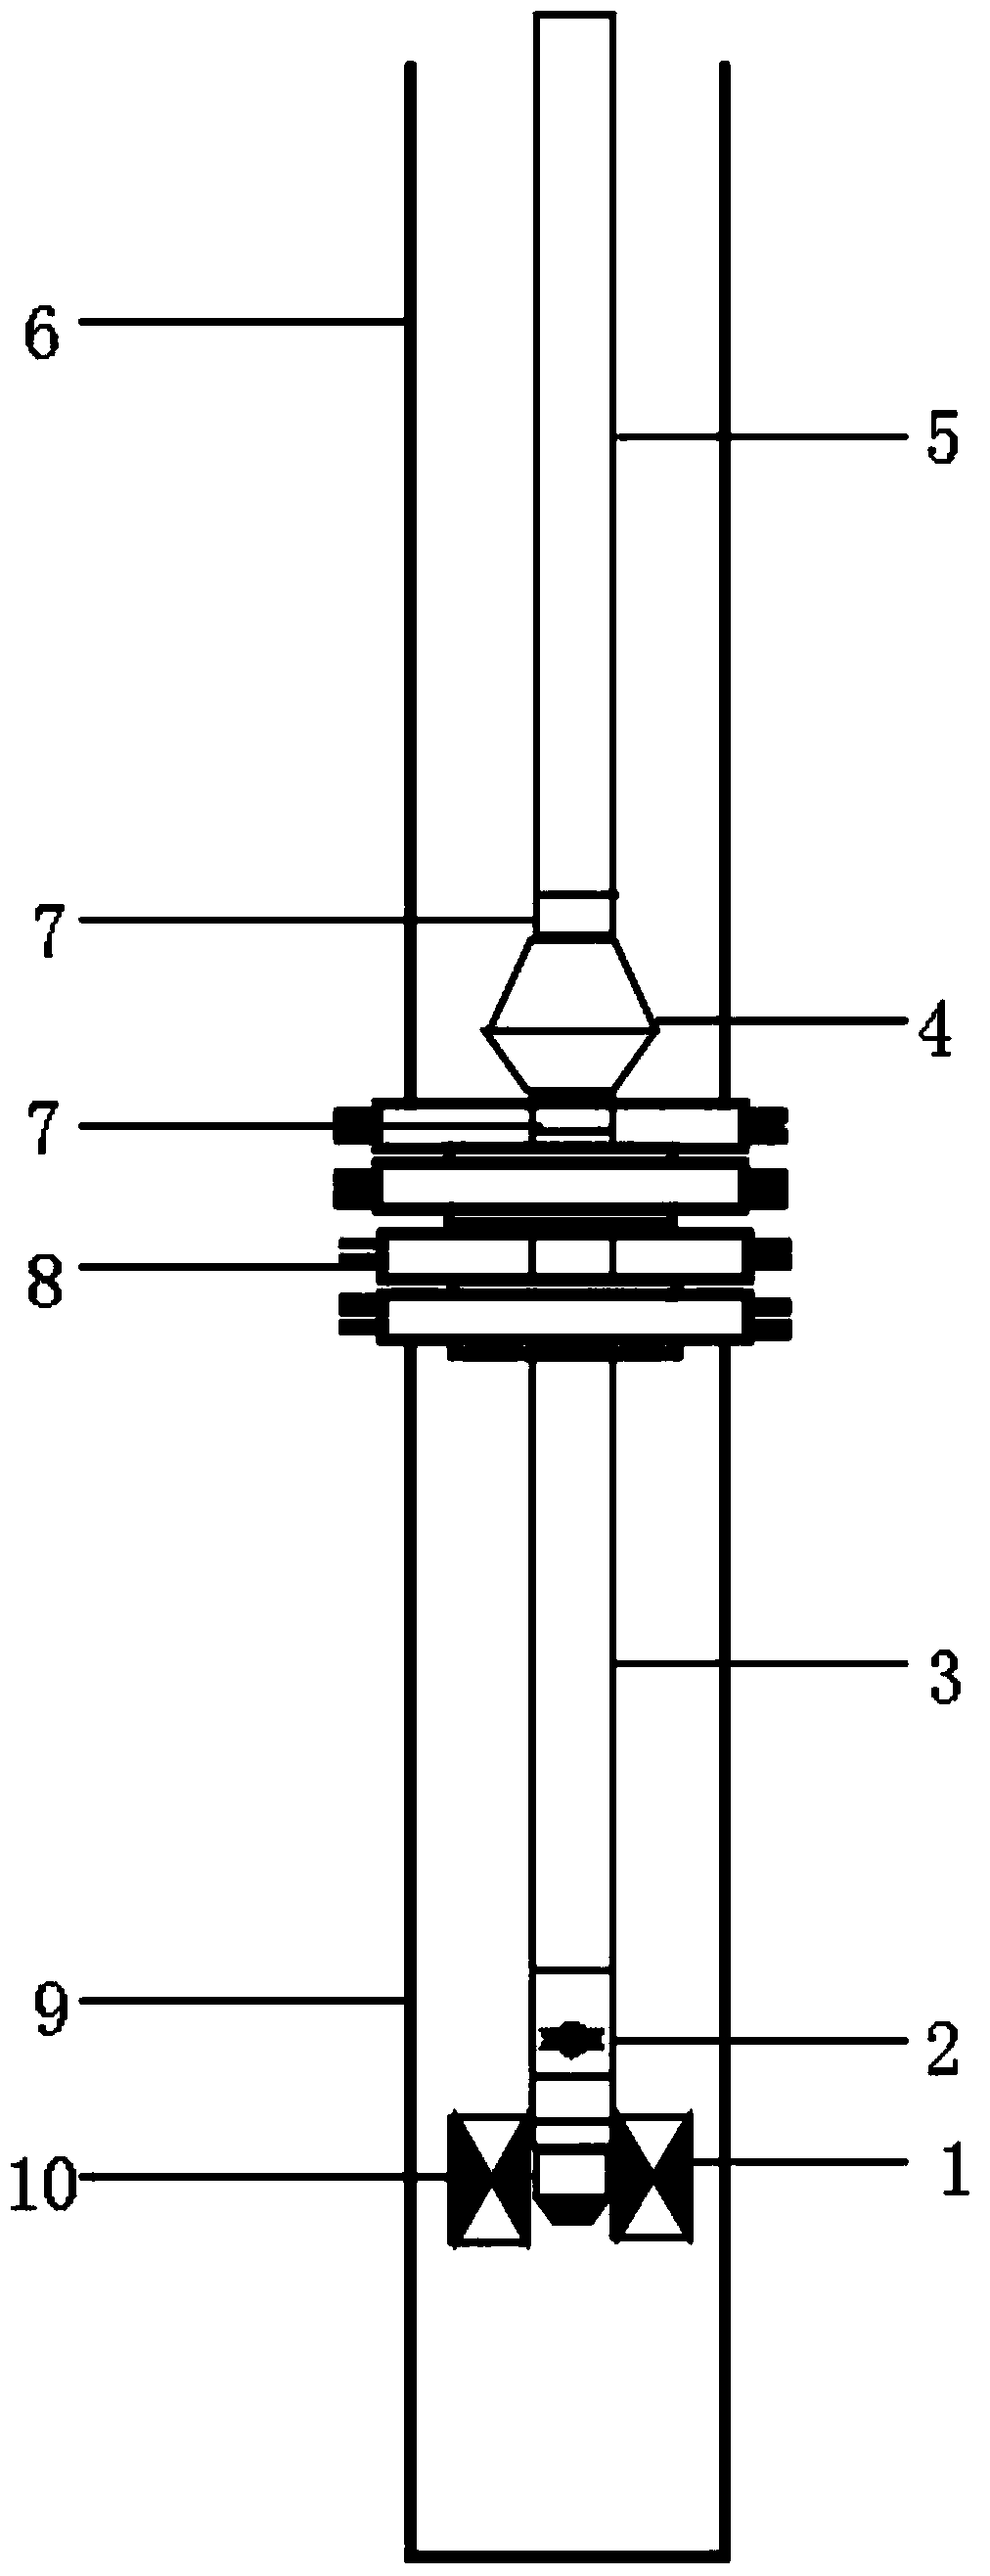 Method of deepwater testing completion string and setting printing